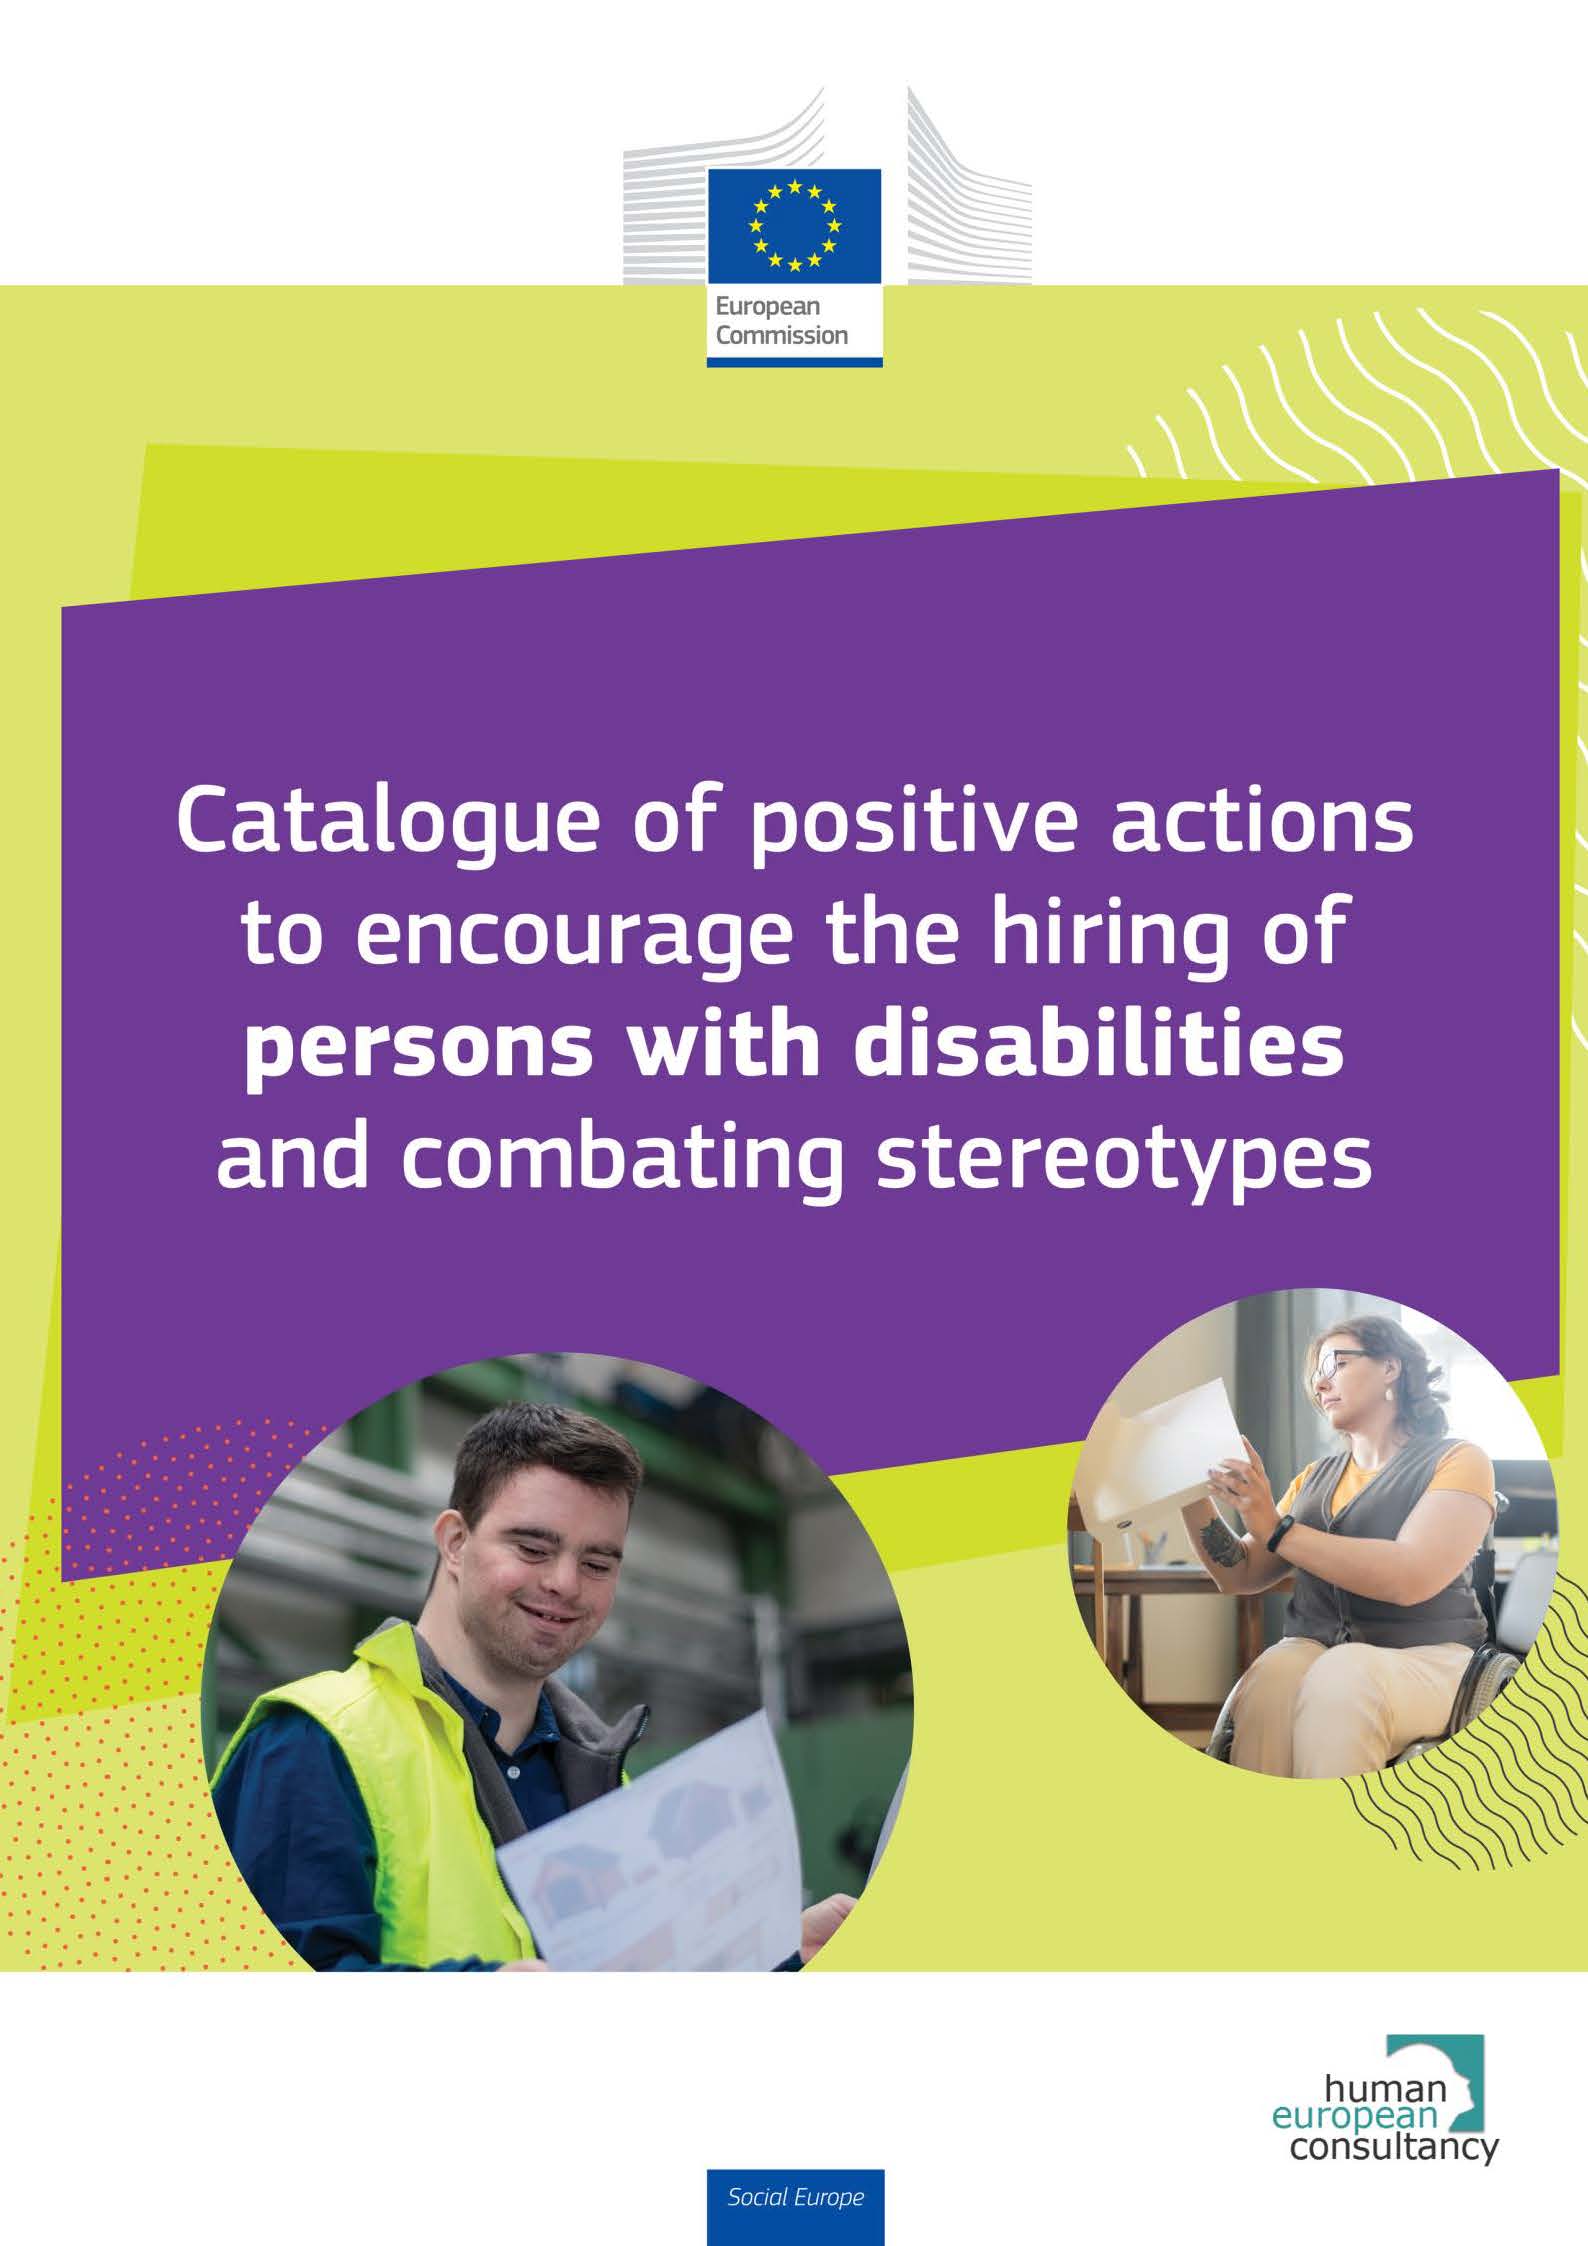 Catalogue of positive actions to encourage the hiring of persons with disabilities and combating stereotypes
(available in all EU languages)